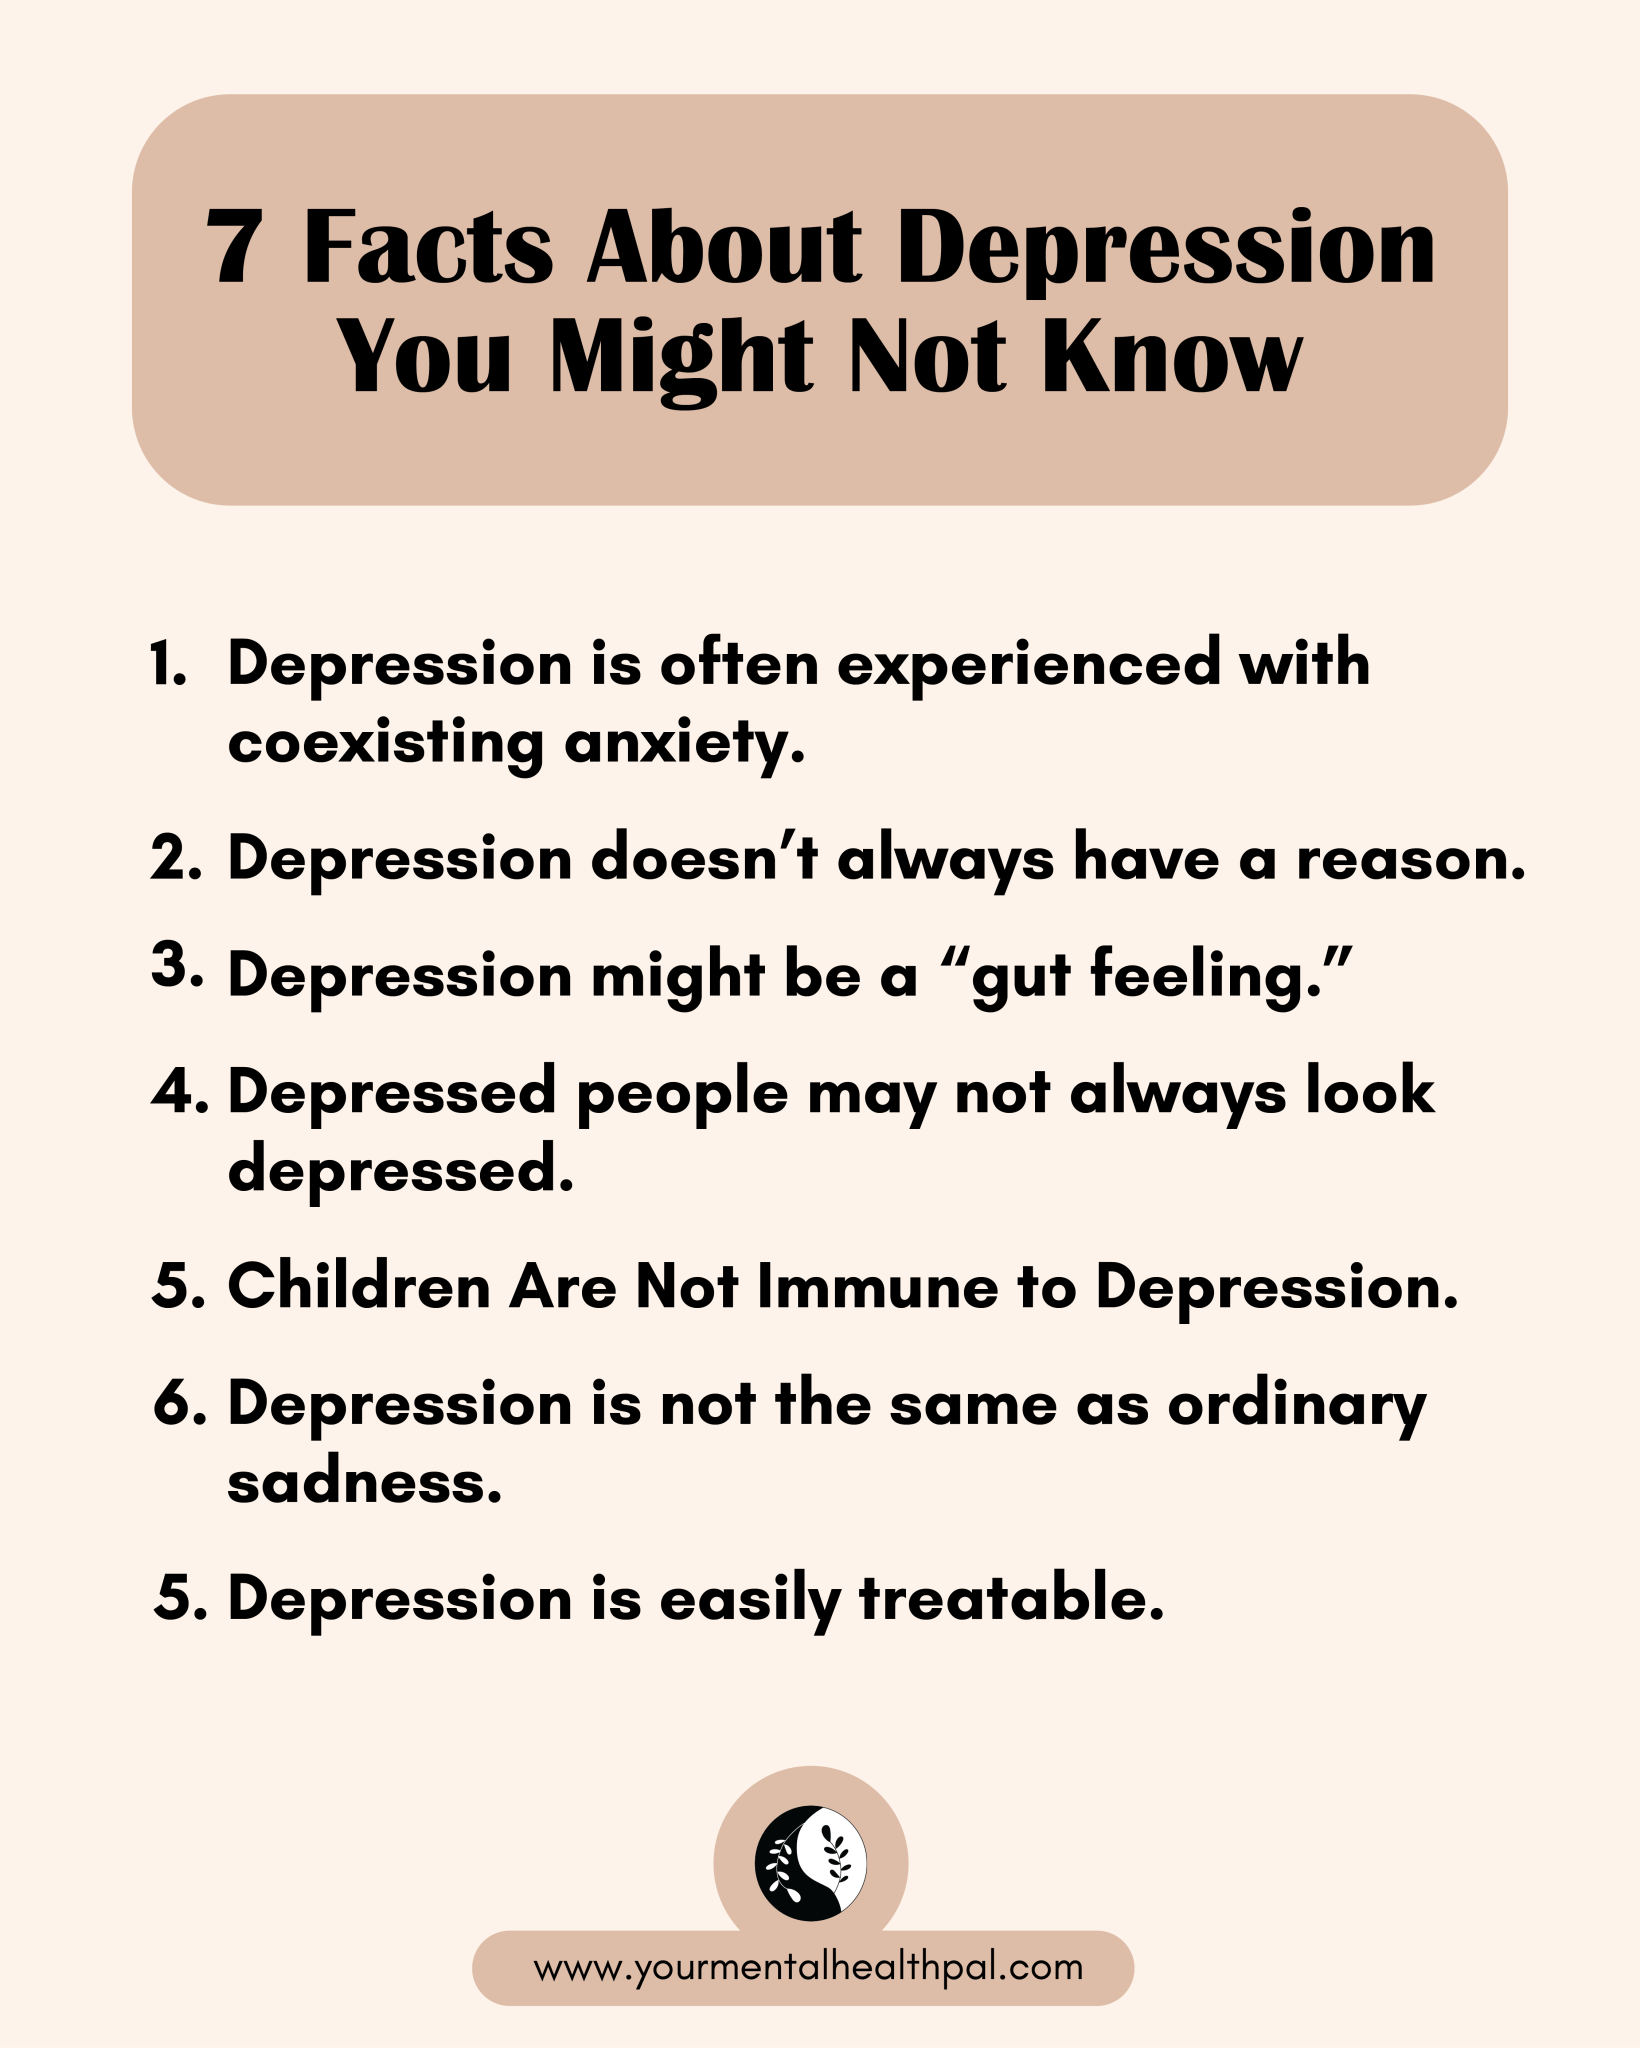 research about depression pdf